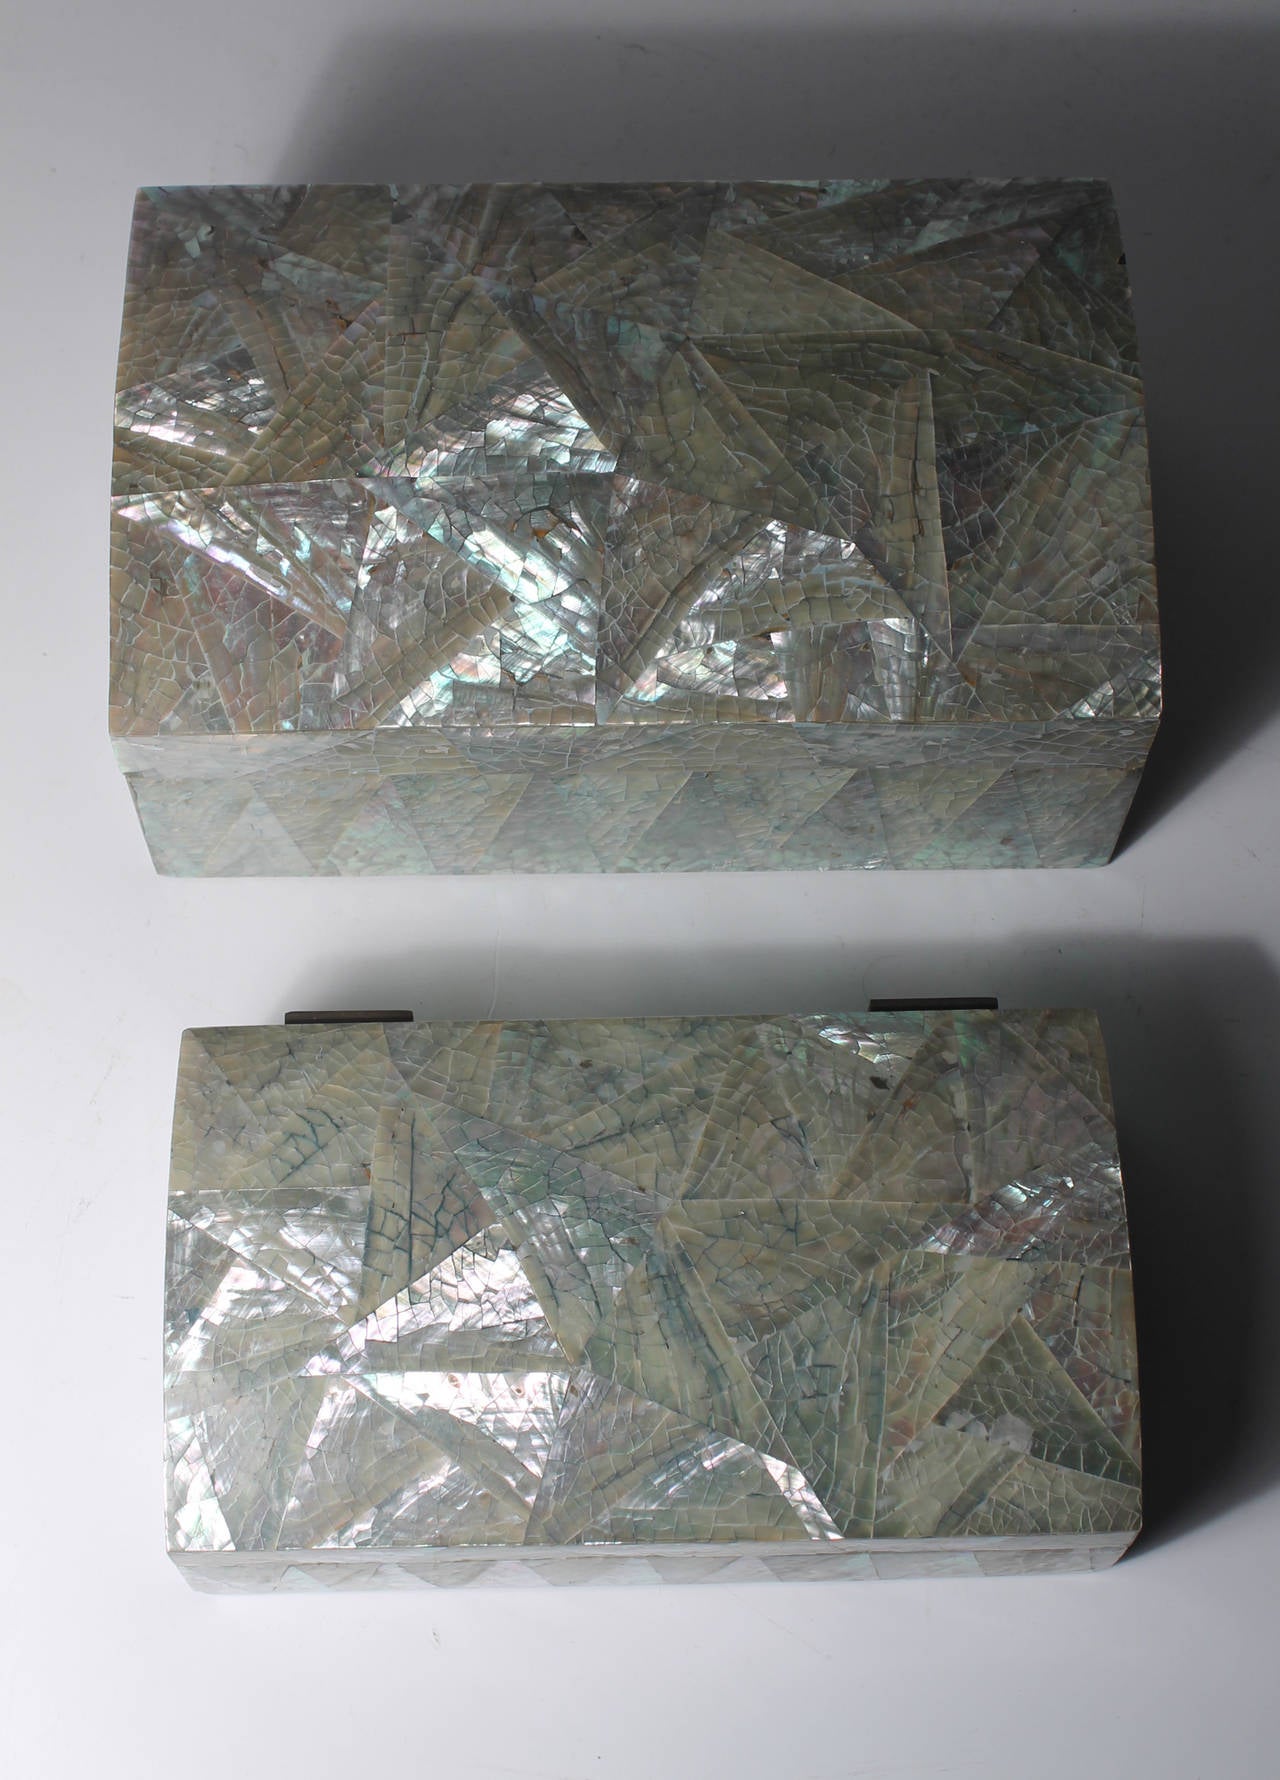 Pair of vintage crackled abalone jewelry boxes. Unmarked. Attributed to Maitland Smith.
Measures:
Larger box dimension:
7 7/8